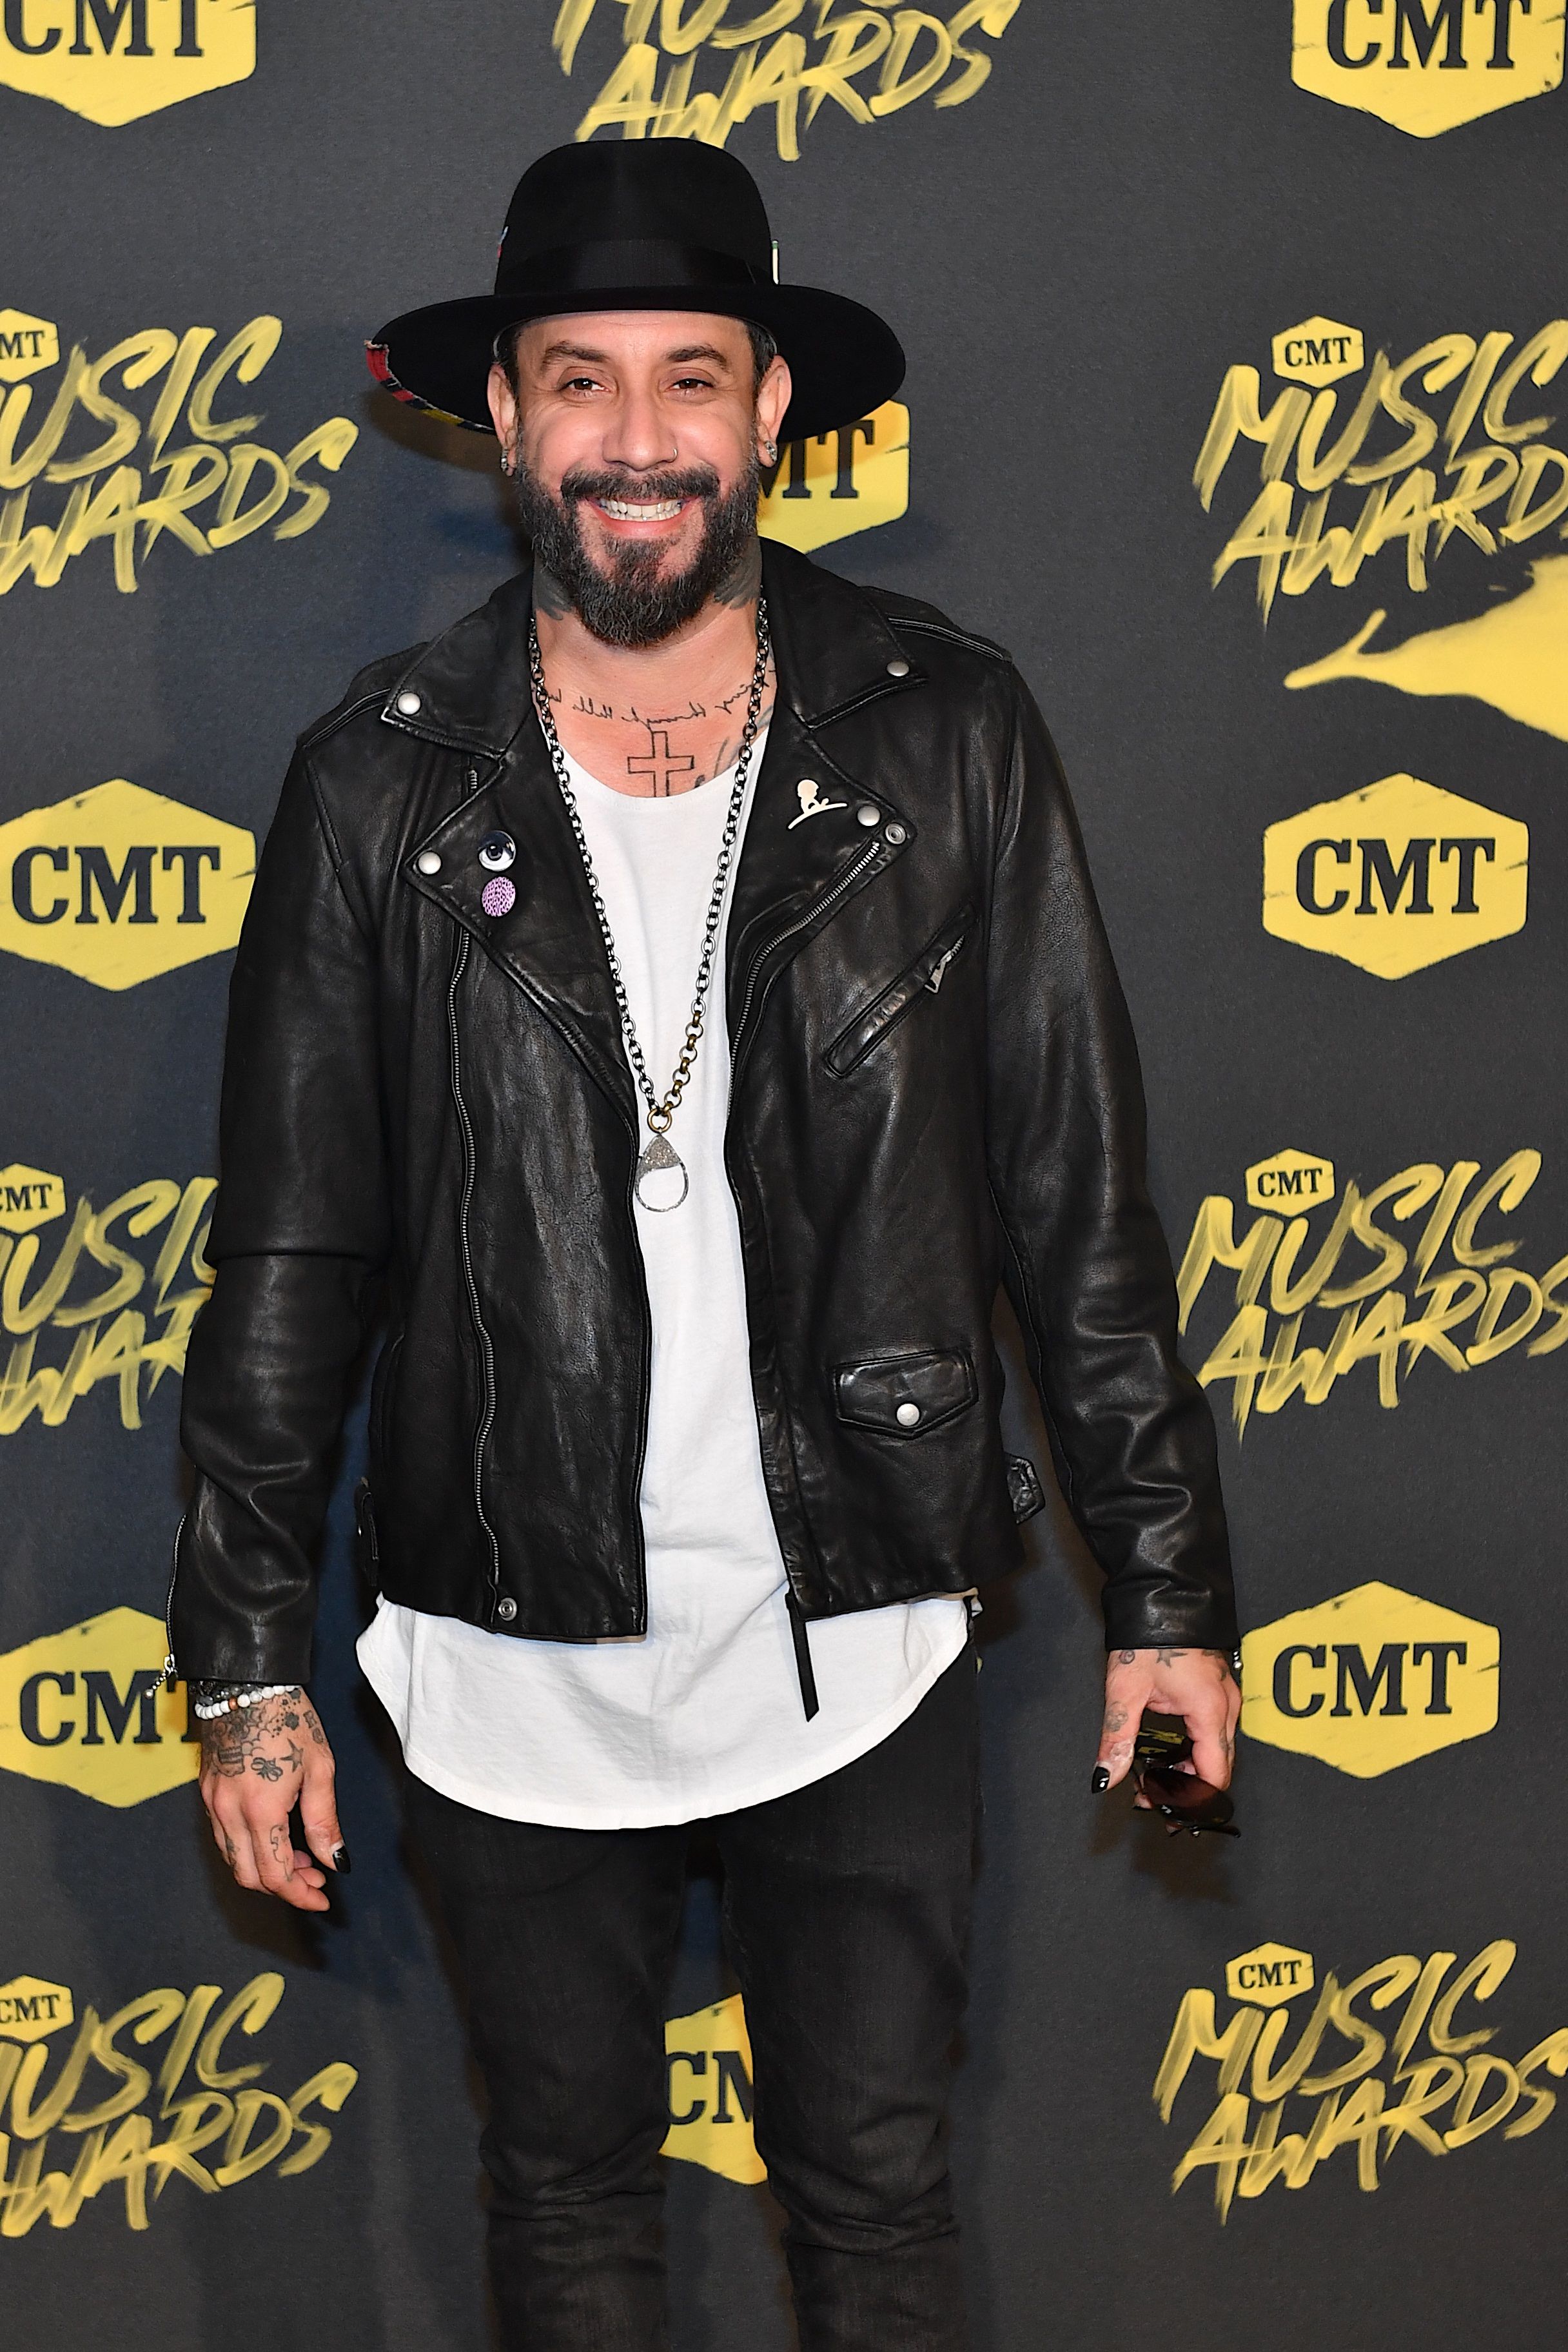 Recording Artist AJ McLean during the 2018 CMT Music Awards at Bridgestone Arena on June 6, 2018 | Photo: Getty Images